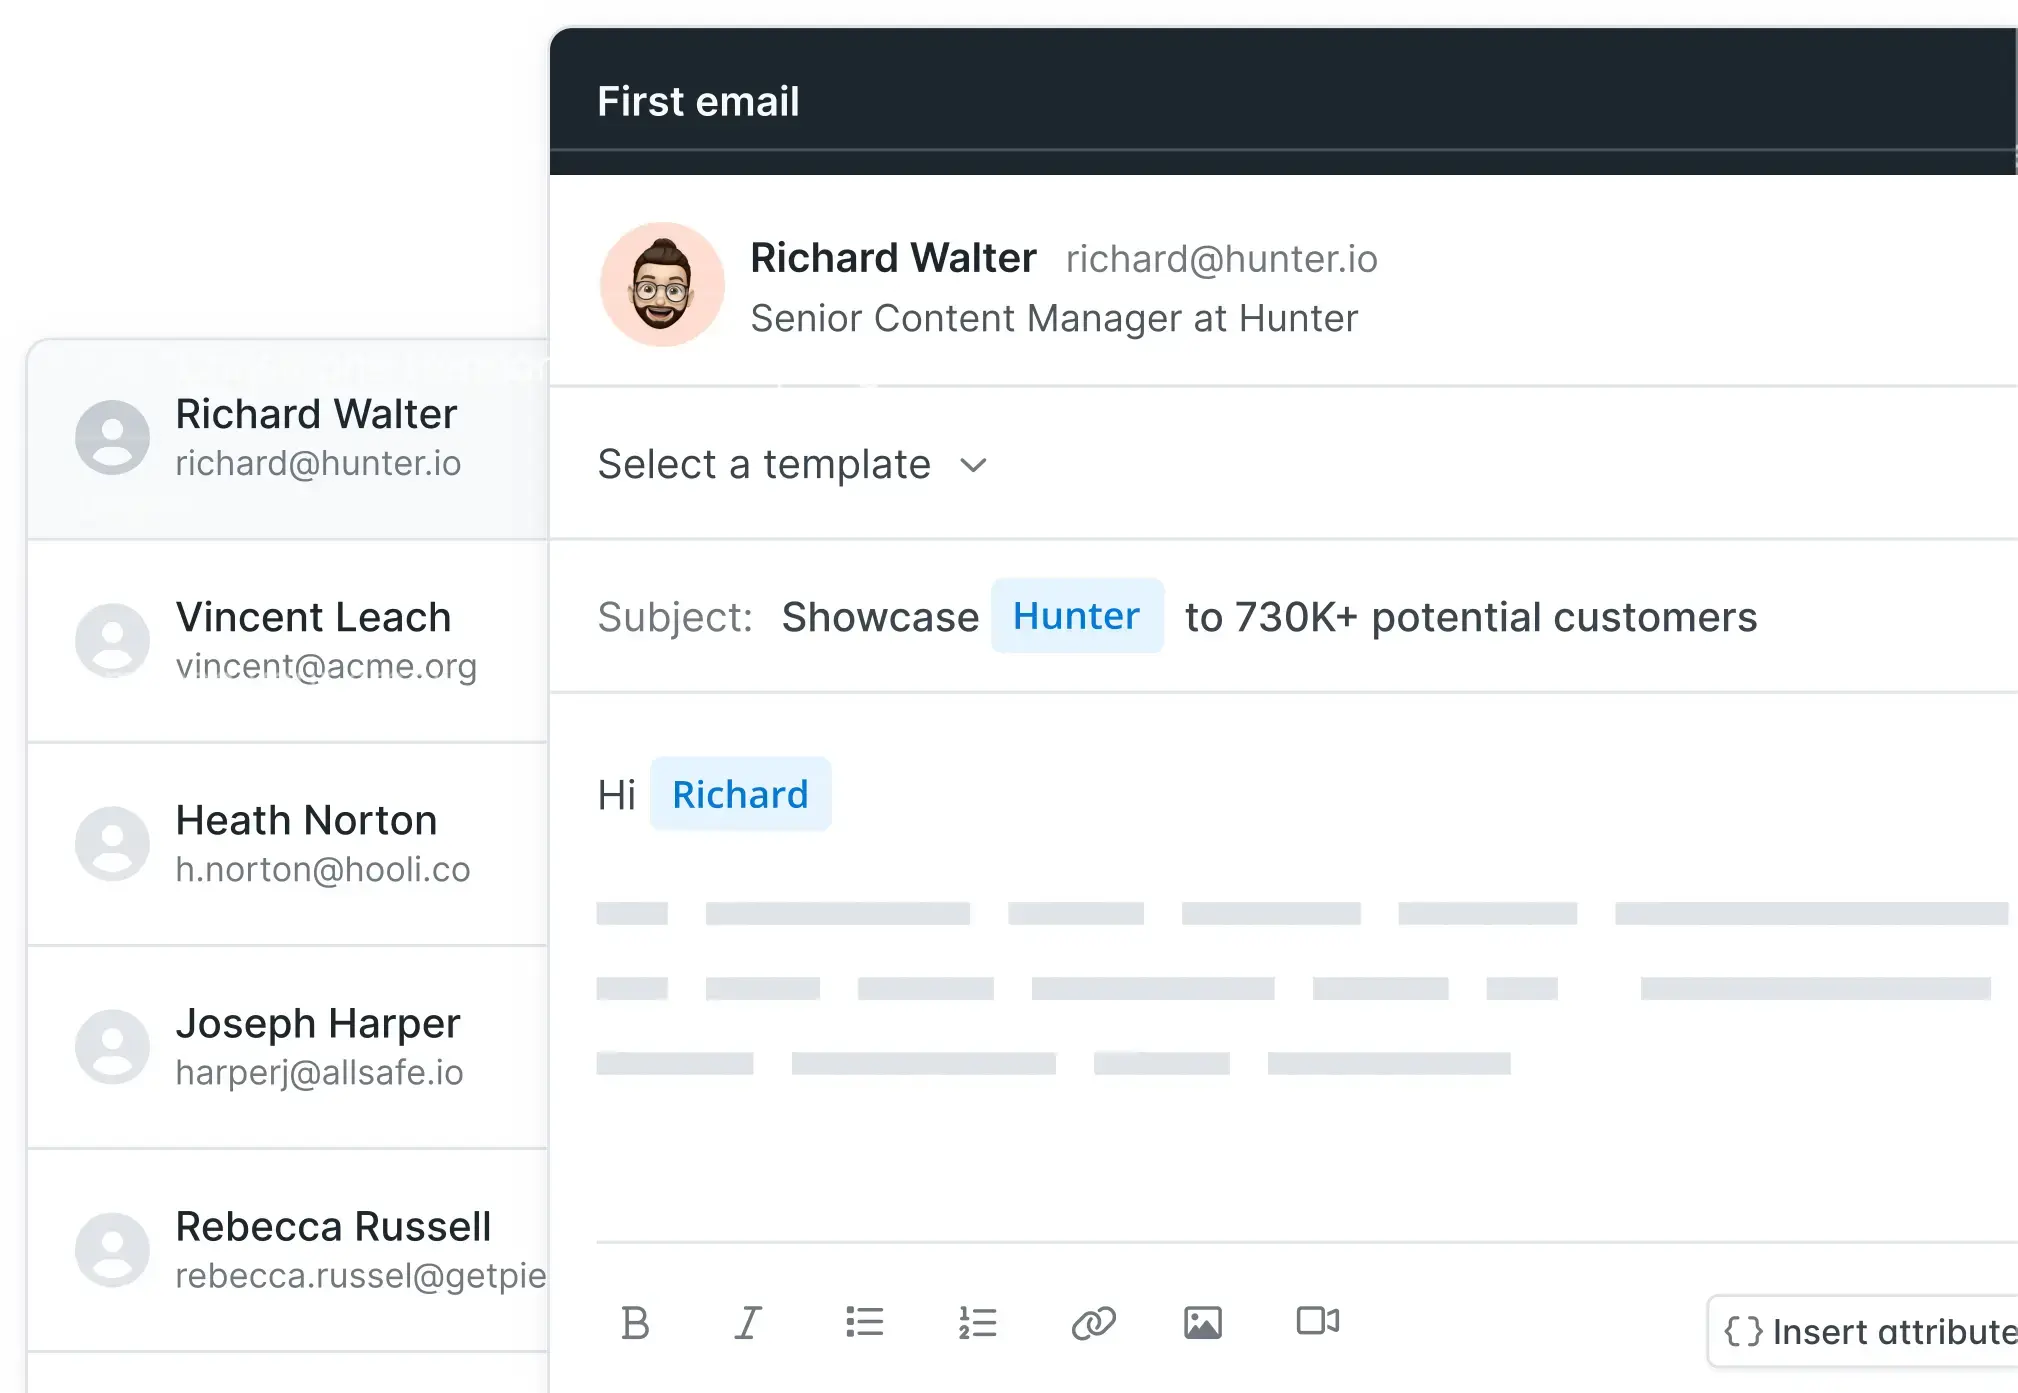 Illustration of Hunter.io cold email outreach software's personalization interface for email campaigns, with features such as dynamic fields for personalized email content.